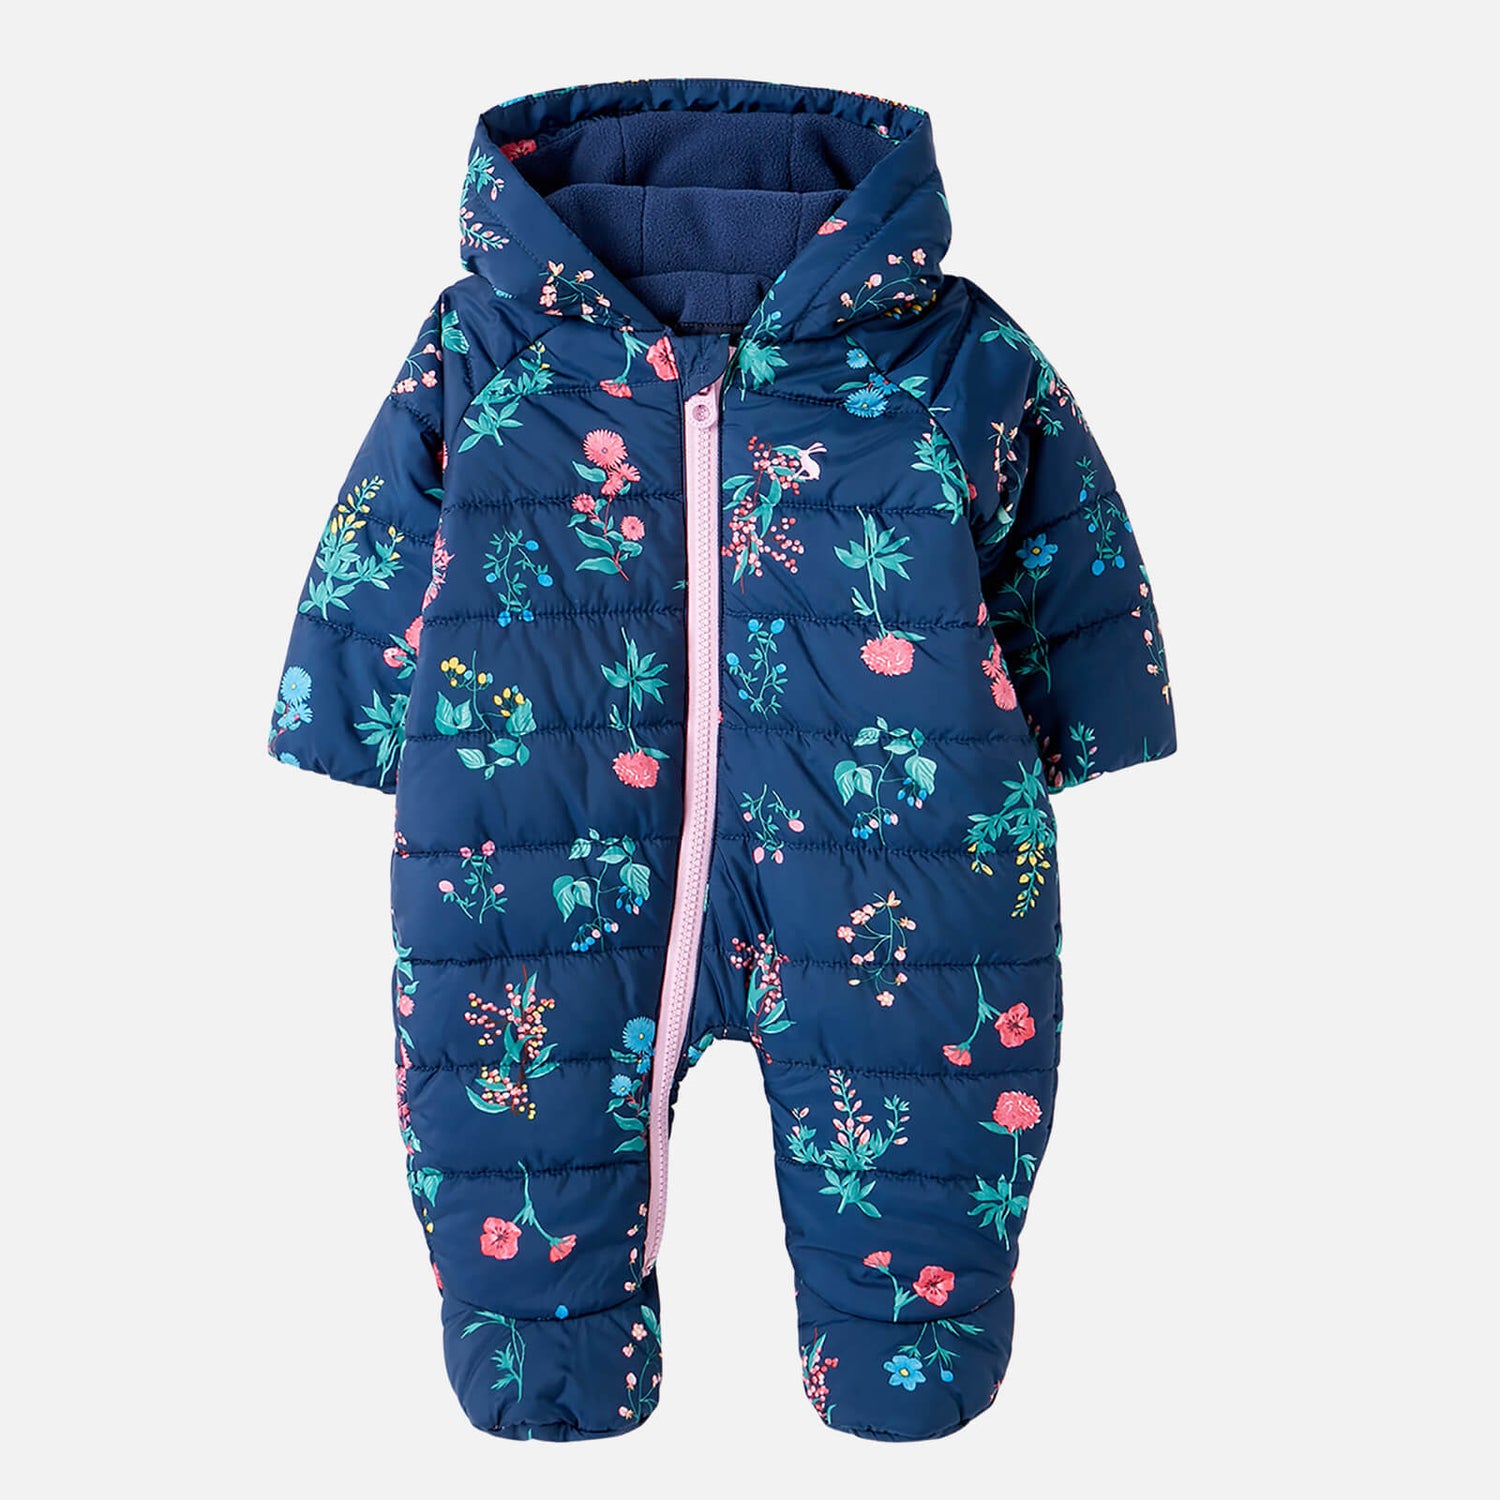 Joules Baby Snuggle Pramsuit - Navy - 18-24 months